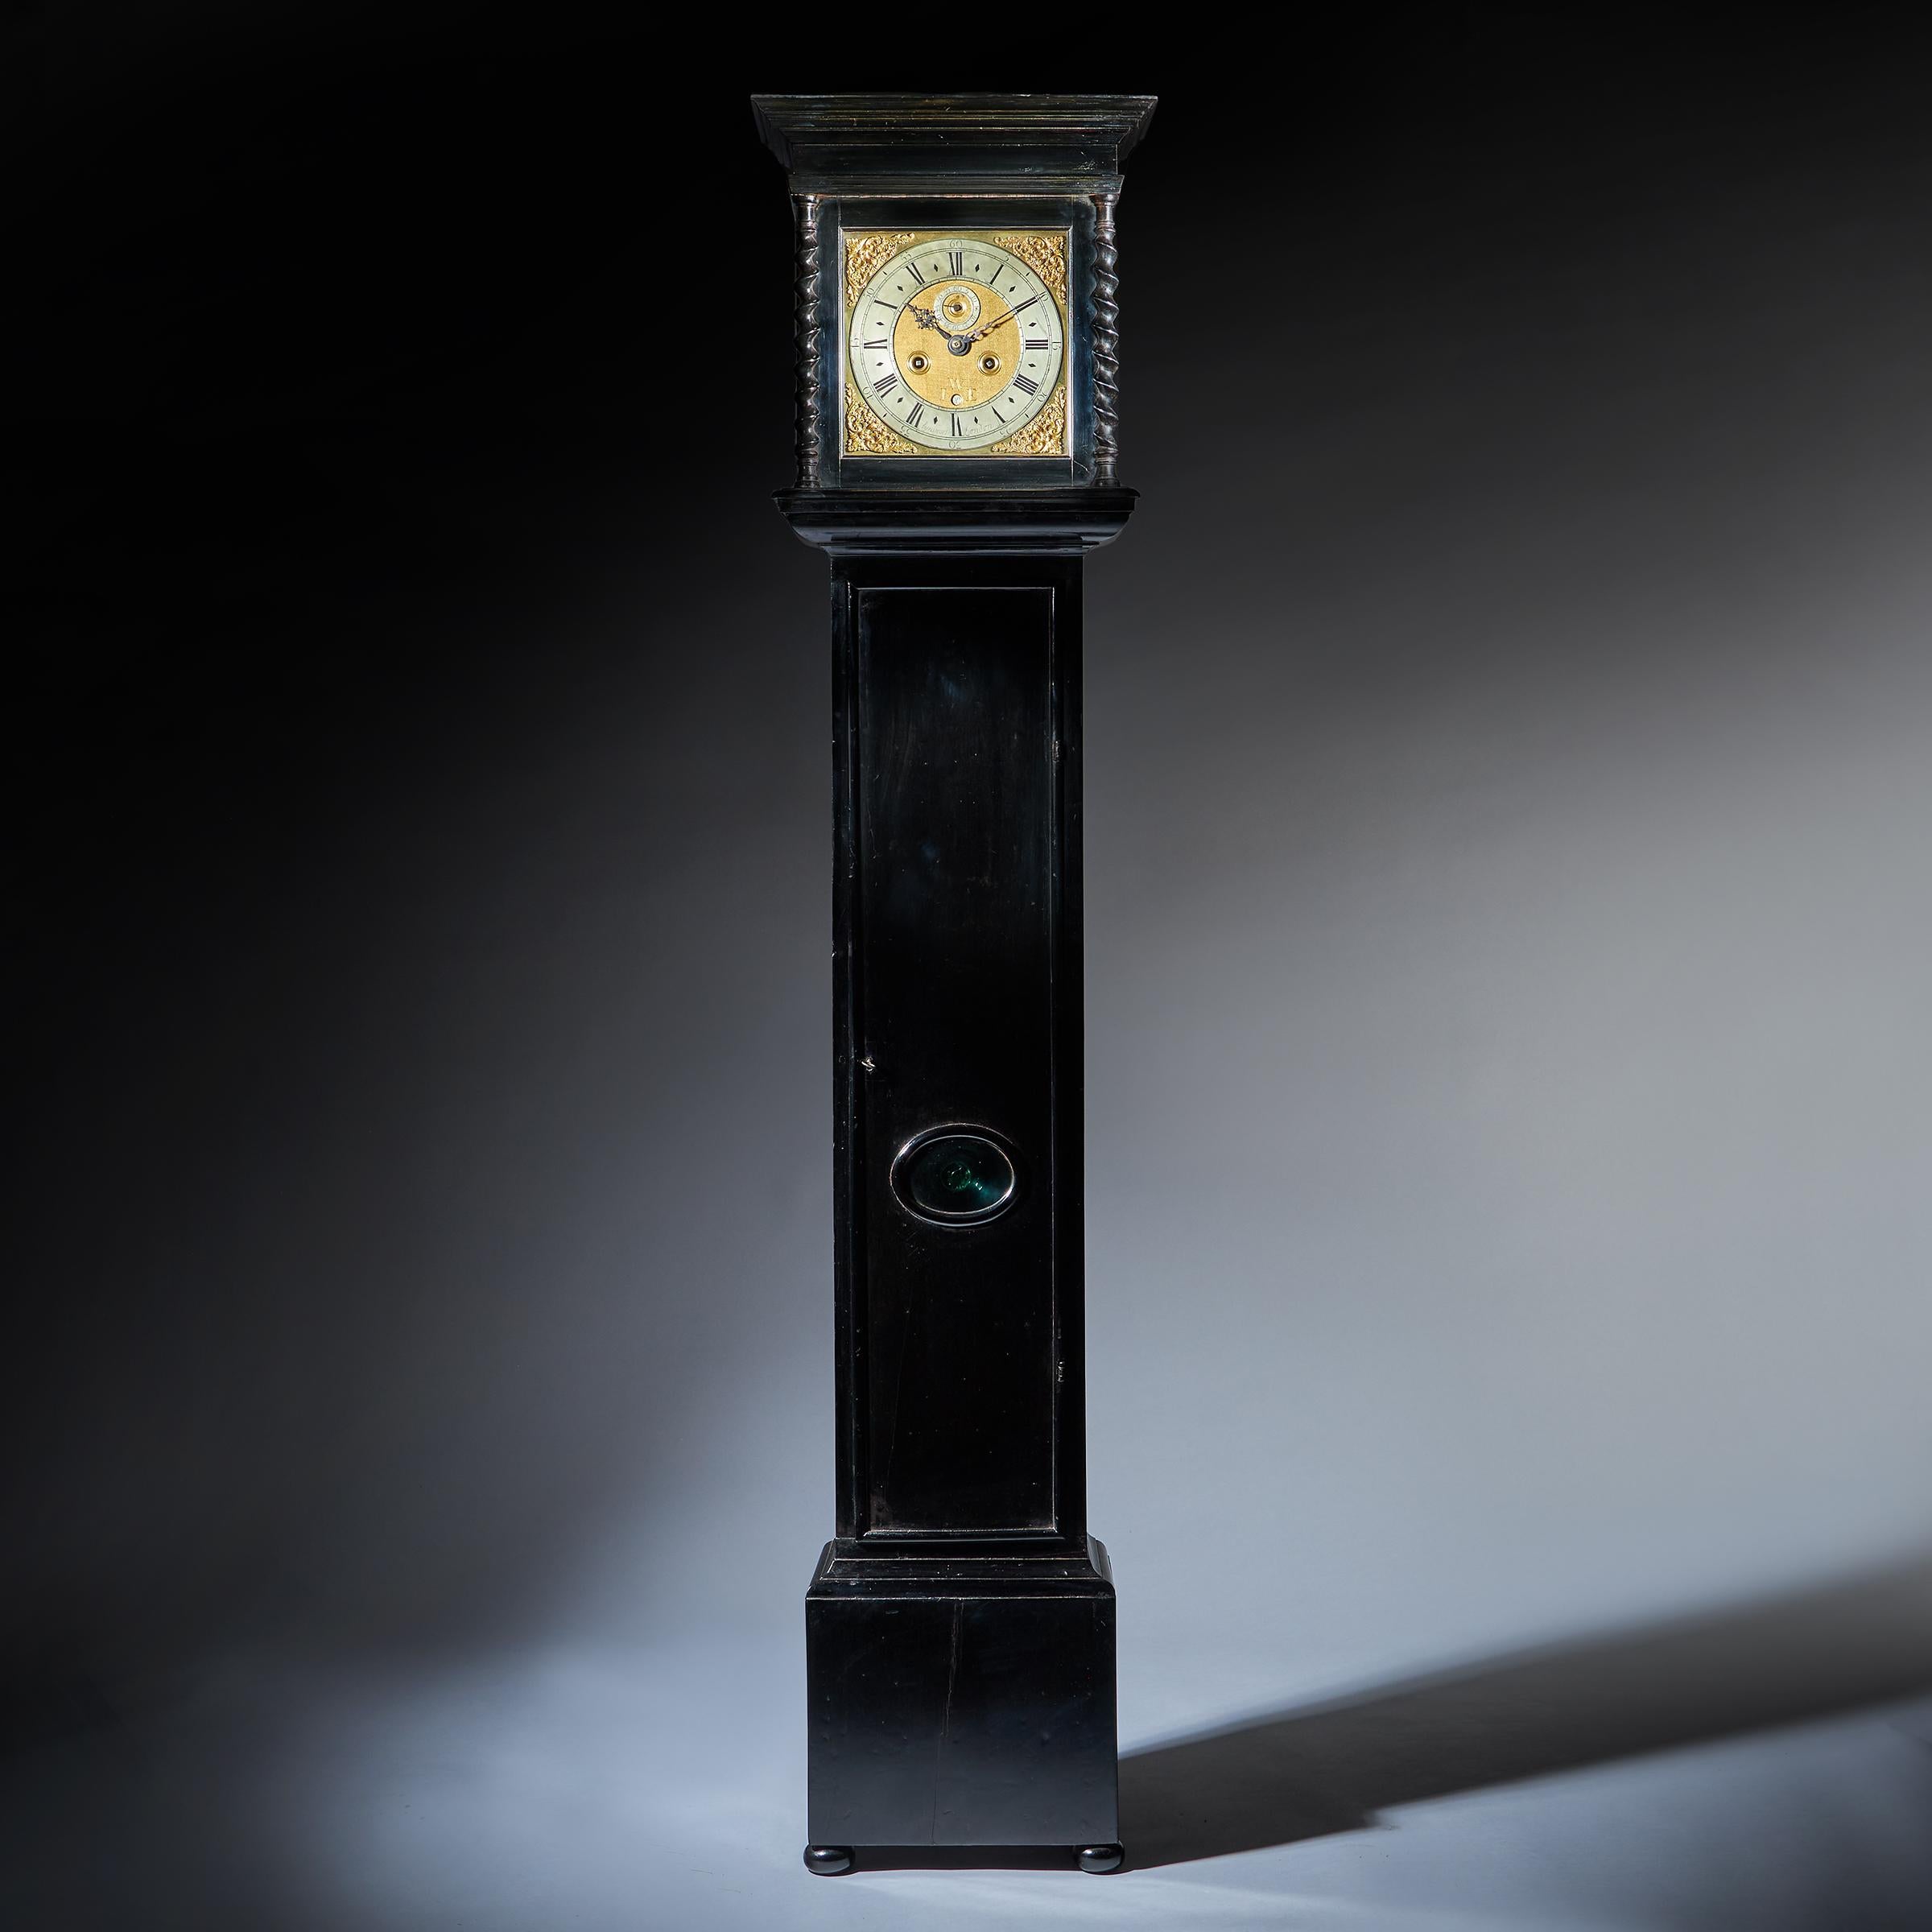 A rare, early English eight-day longcase clock signed on the chapter ring Aynsworth London, dating to the period c.1690-1700. 

The elegantly proportioned ebonised case, formerly with rising square hood now sliding, is framed with convex mouldings